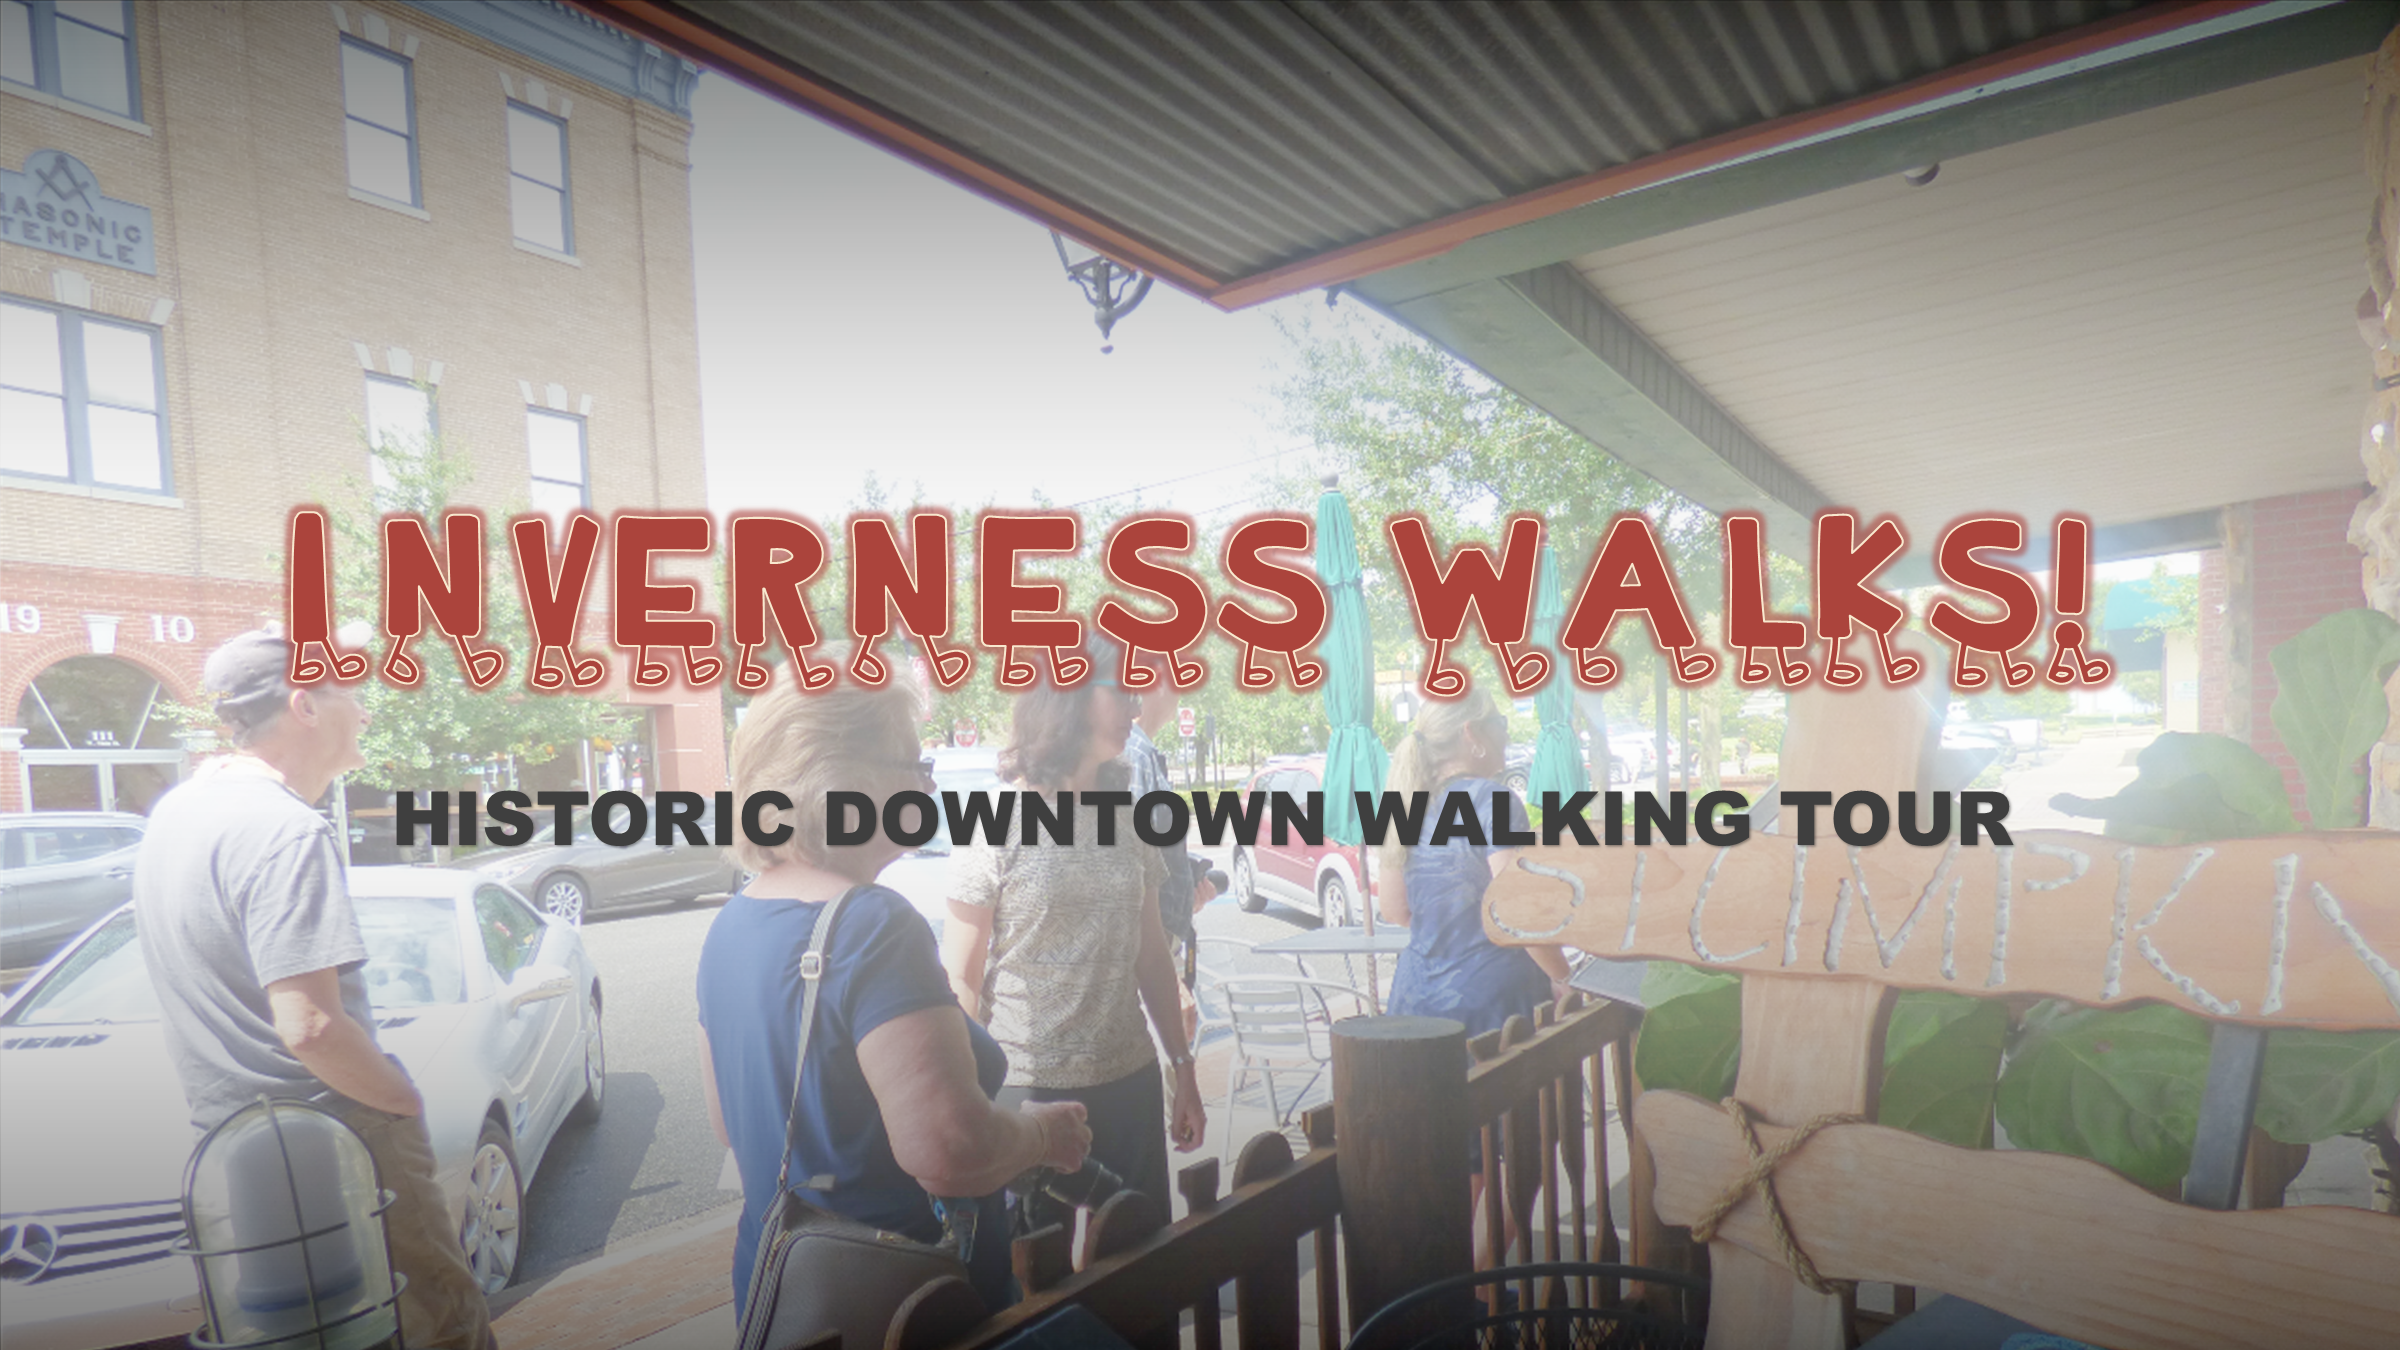 Group of people walking on a downtown street, with the 1910 Historic Masonic Building in the background. Inverness Walks: Historic Downtown Walking Tour is overlaid on the image.